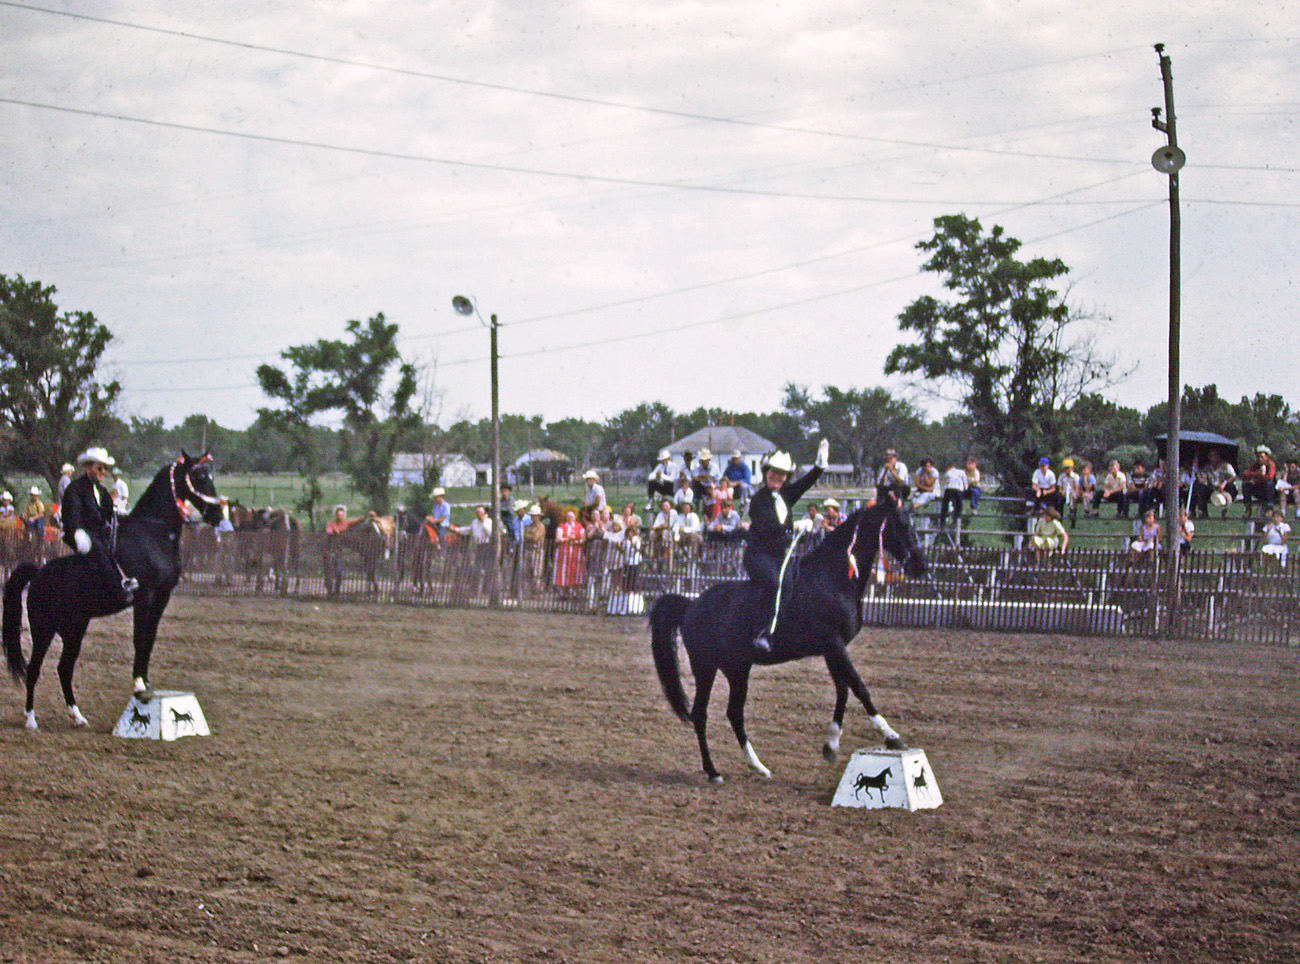 These were called "Dancing Horses" and were housed in Meade, Kansas. They performed at Cimarron Days in 1953 and were photographed by my late father-in-law, J. Leslie Stewart. This was found in a storage box which now belongs to his children. View full size.